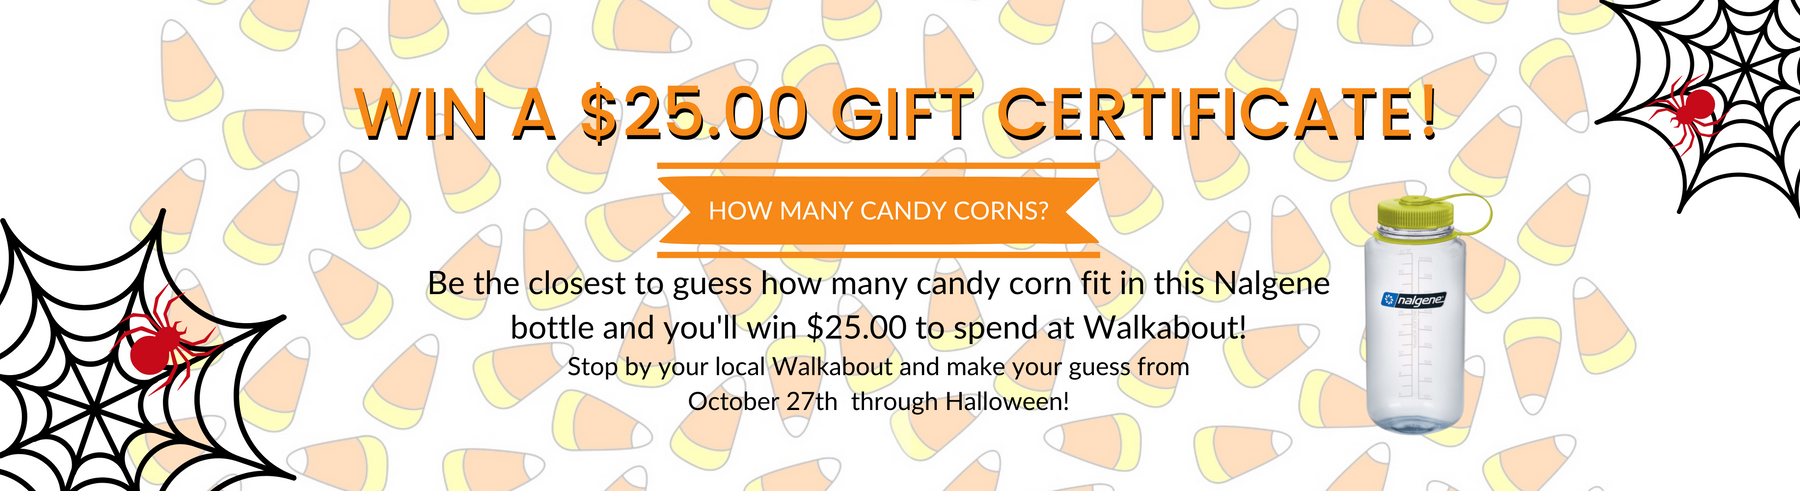 Guess how many Candy Corns for a chance to WIN a $25.00 Gift Certificate! - Oct 27th - 31st)